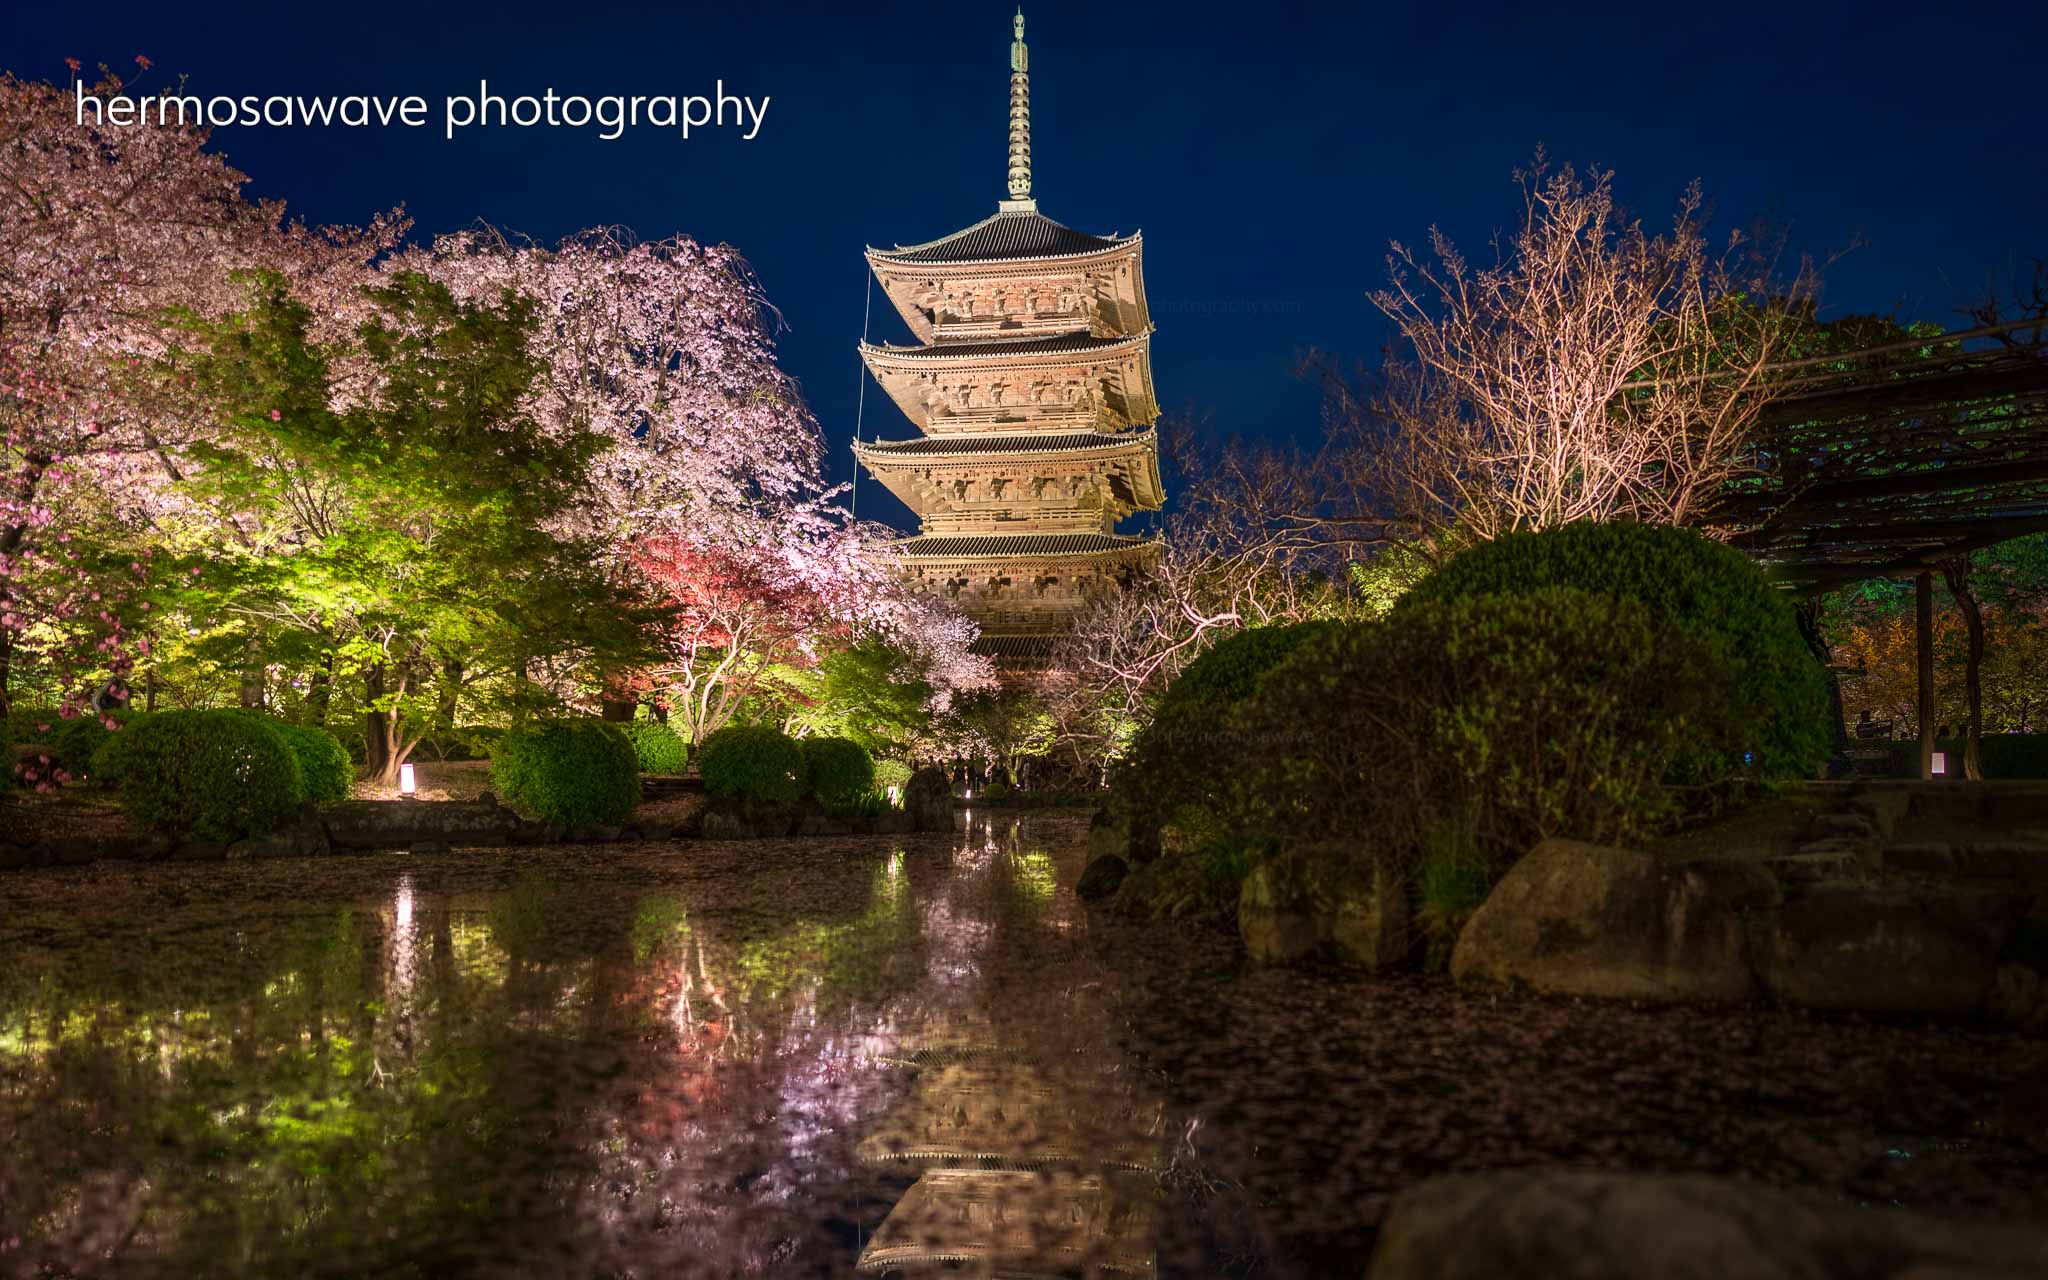 Daniel Sofer Toji Pagoda 東寺五重塔 The Annual Evening Light Up At Toji Temple With The 5 Story Pagoda Surrounded By Cherry Blossoms Reflected In The Pond 東寺で毎年恒例の夜のライトアップ 桜に囲まれた五重塔が池に映る T Co